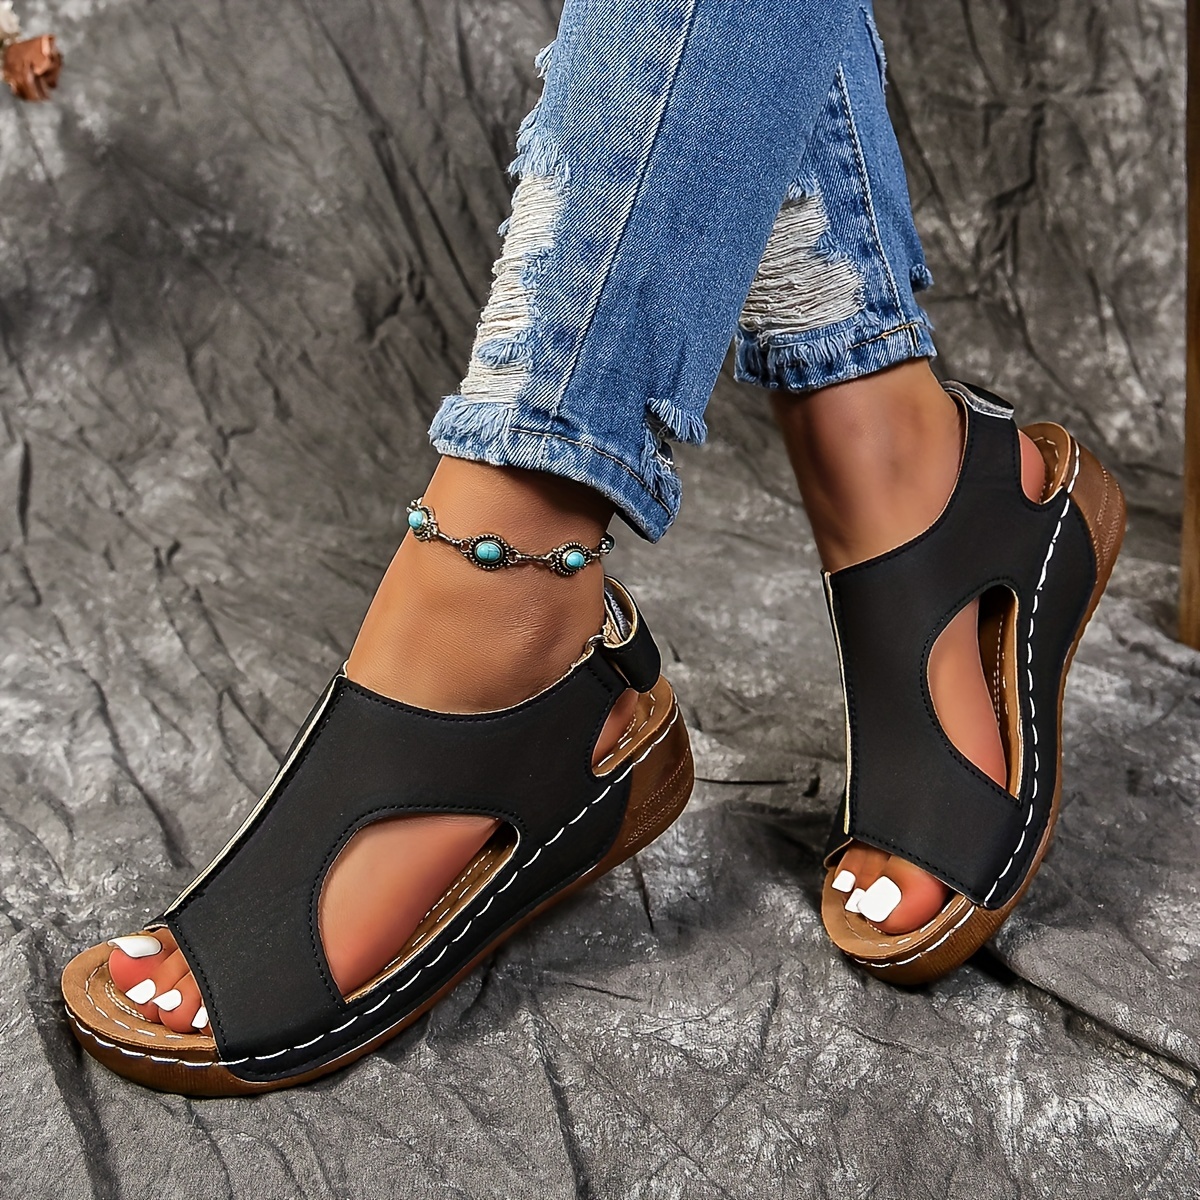 women s solid color wedge heeled sandals casual open toe details 8